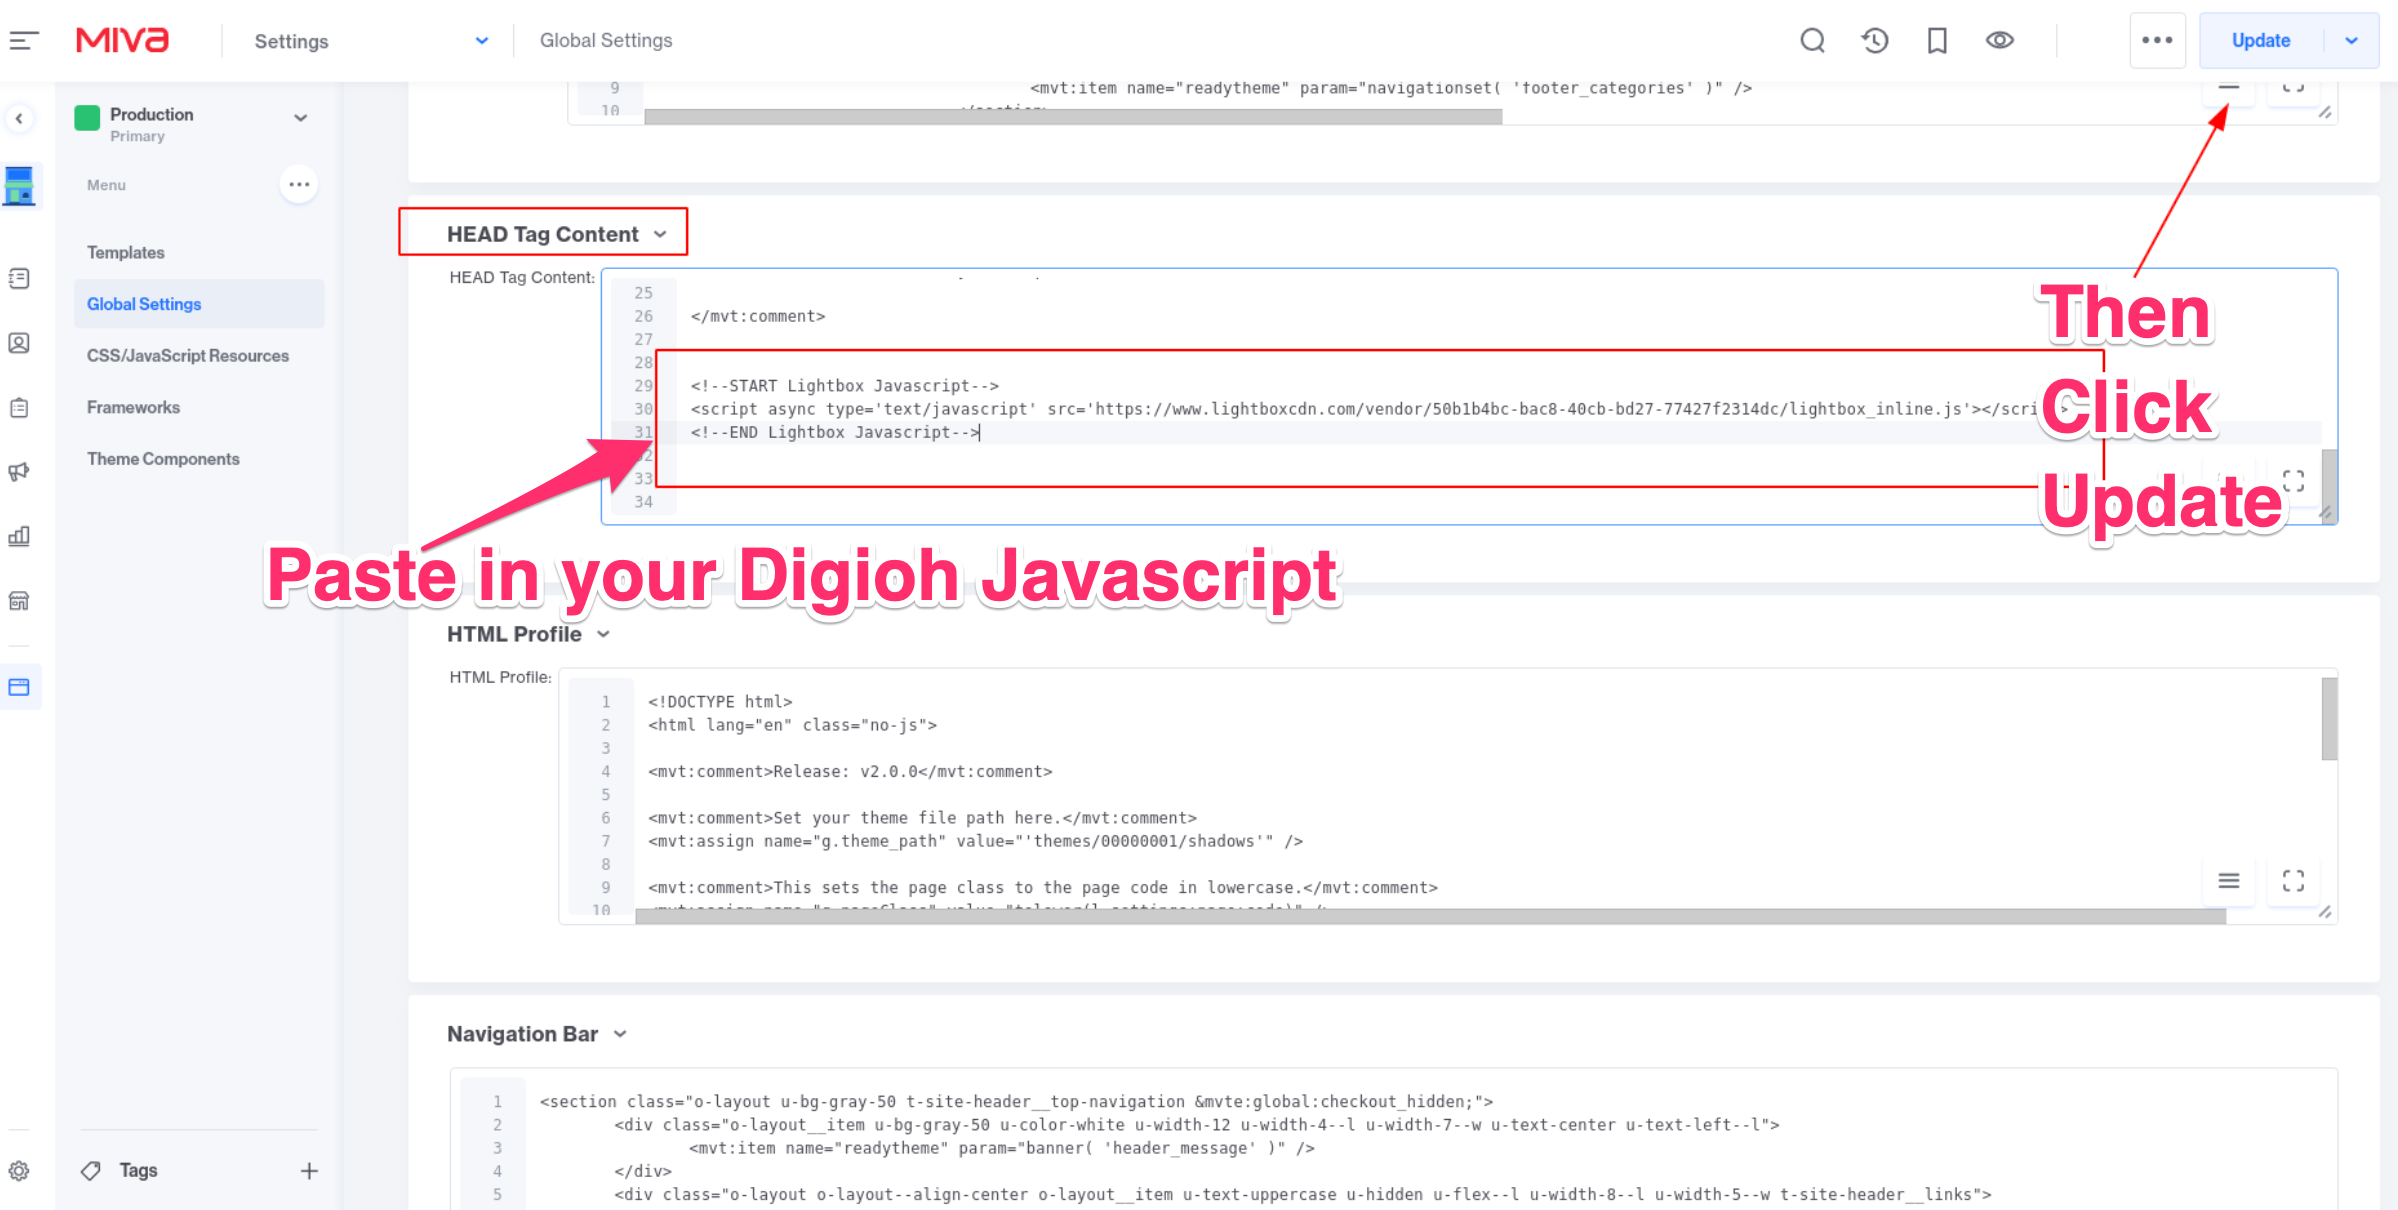 installing digioh javascript in the head content of a Miva site